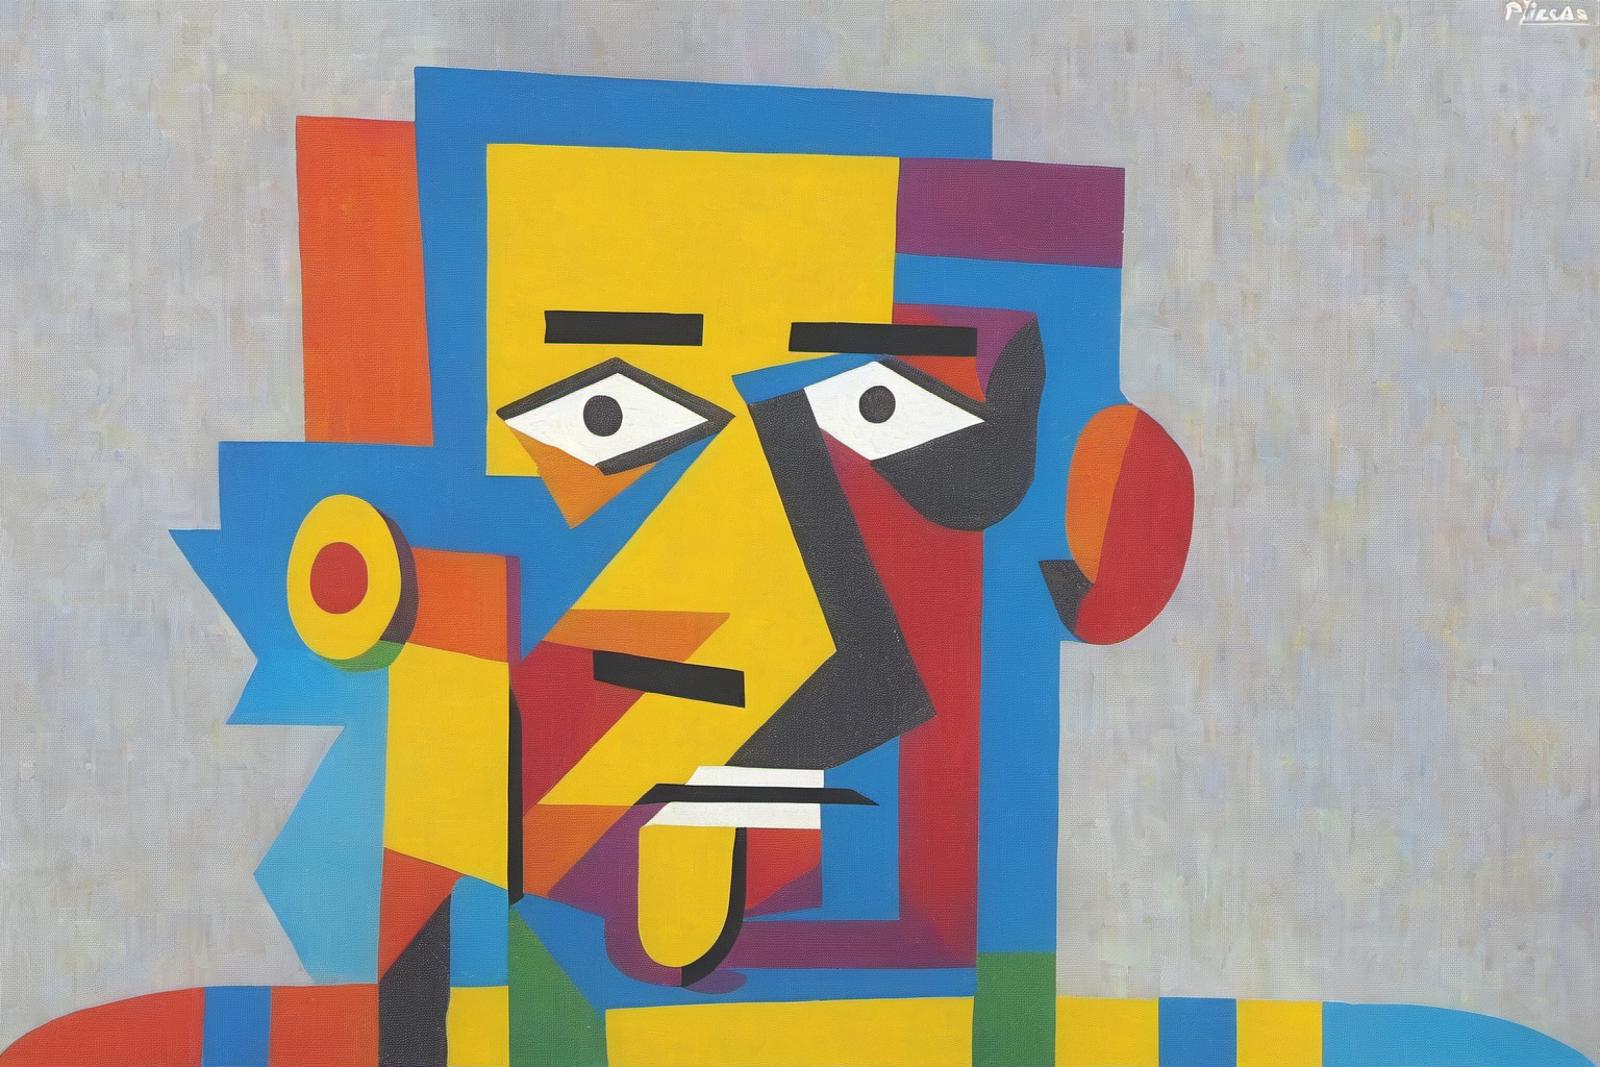 Abstract Painting of a Man's Face with Yellow and Blue Colors